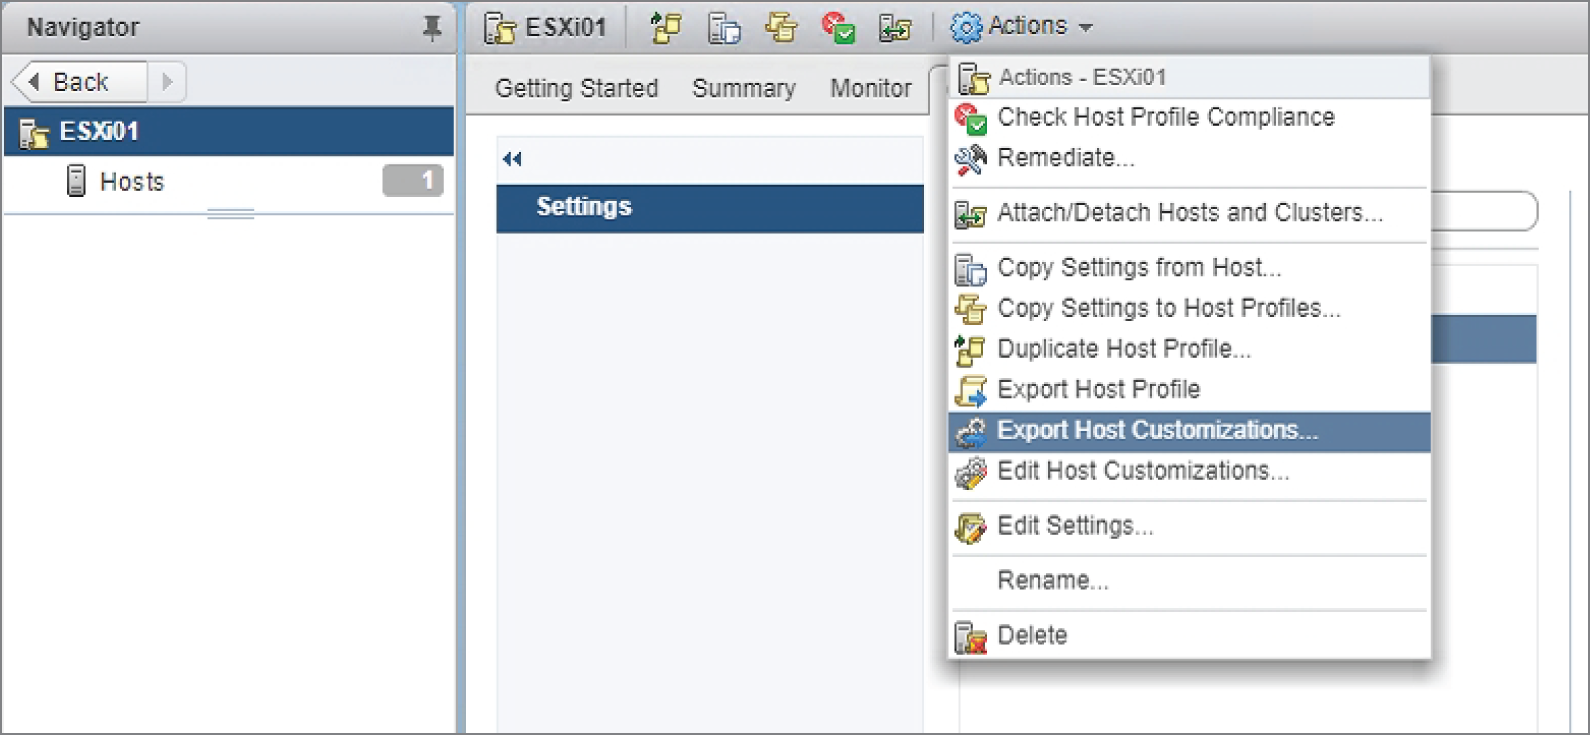 Snapshot of changing security settings on a network switch using a host profile.